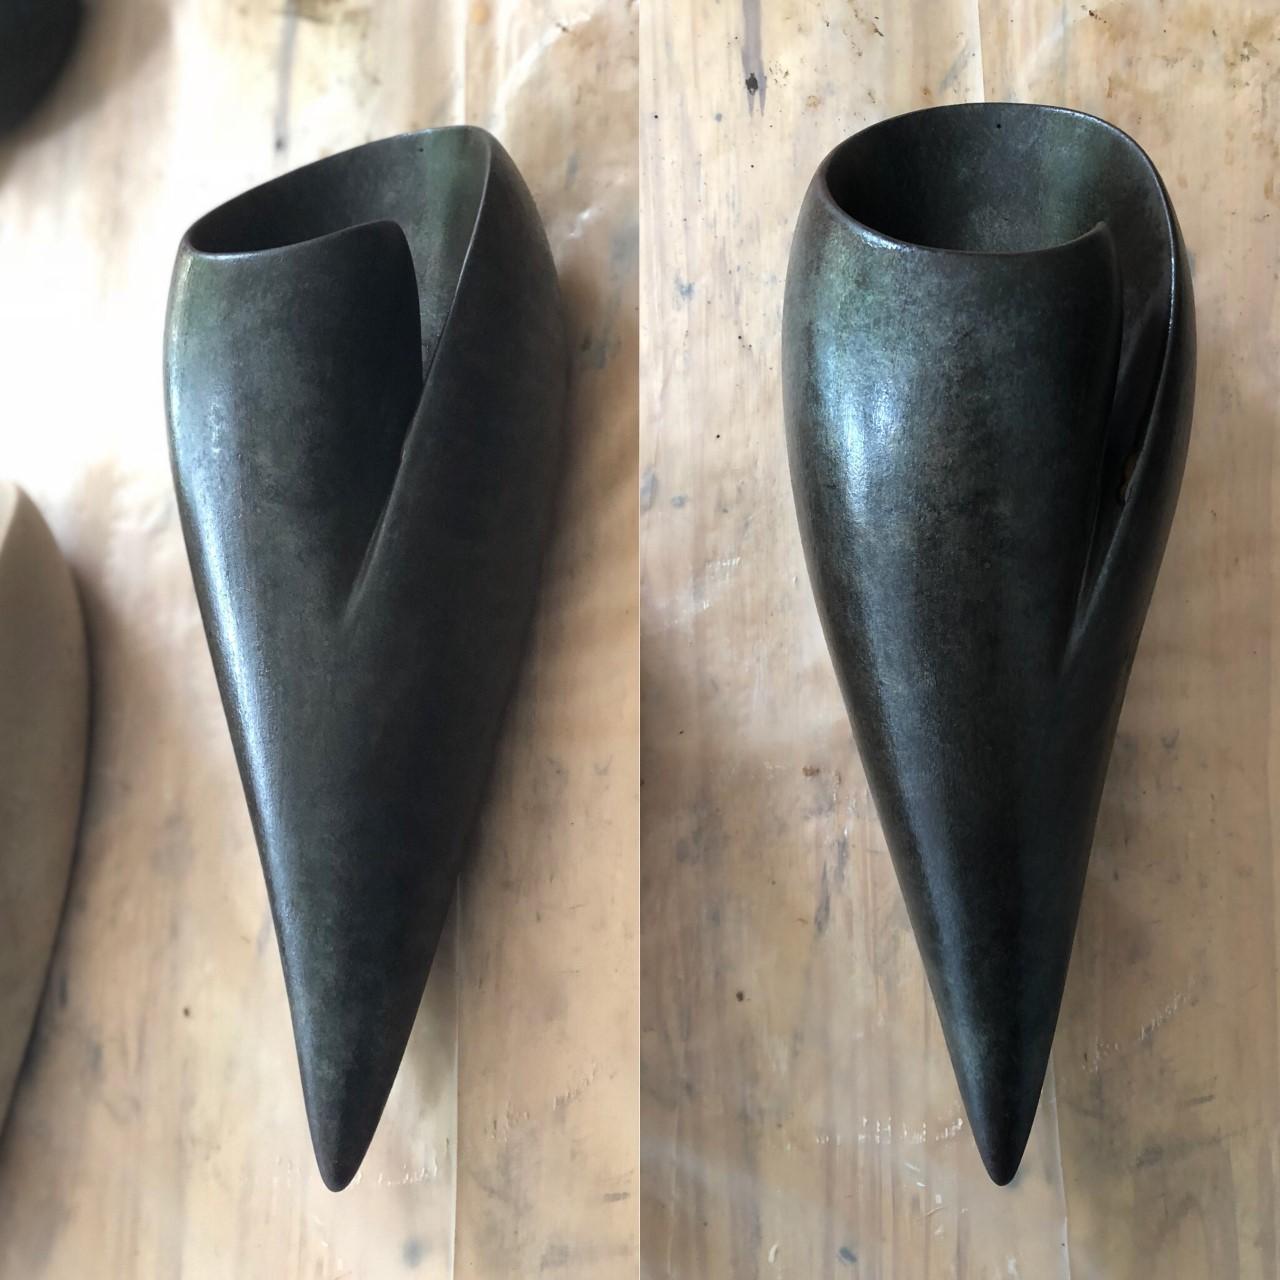 Handmade Leila plaster wall light or sconce, in silky smooth ebony finish, created by artist Hannah Woodhouse in her London studio. Contemporary design inspired by nature and mid-century European sculpture. The Leila wall sconce not only provides